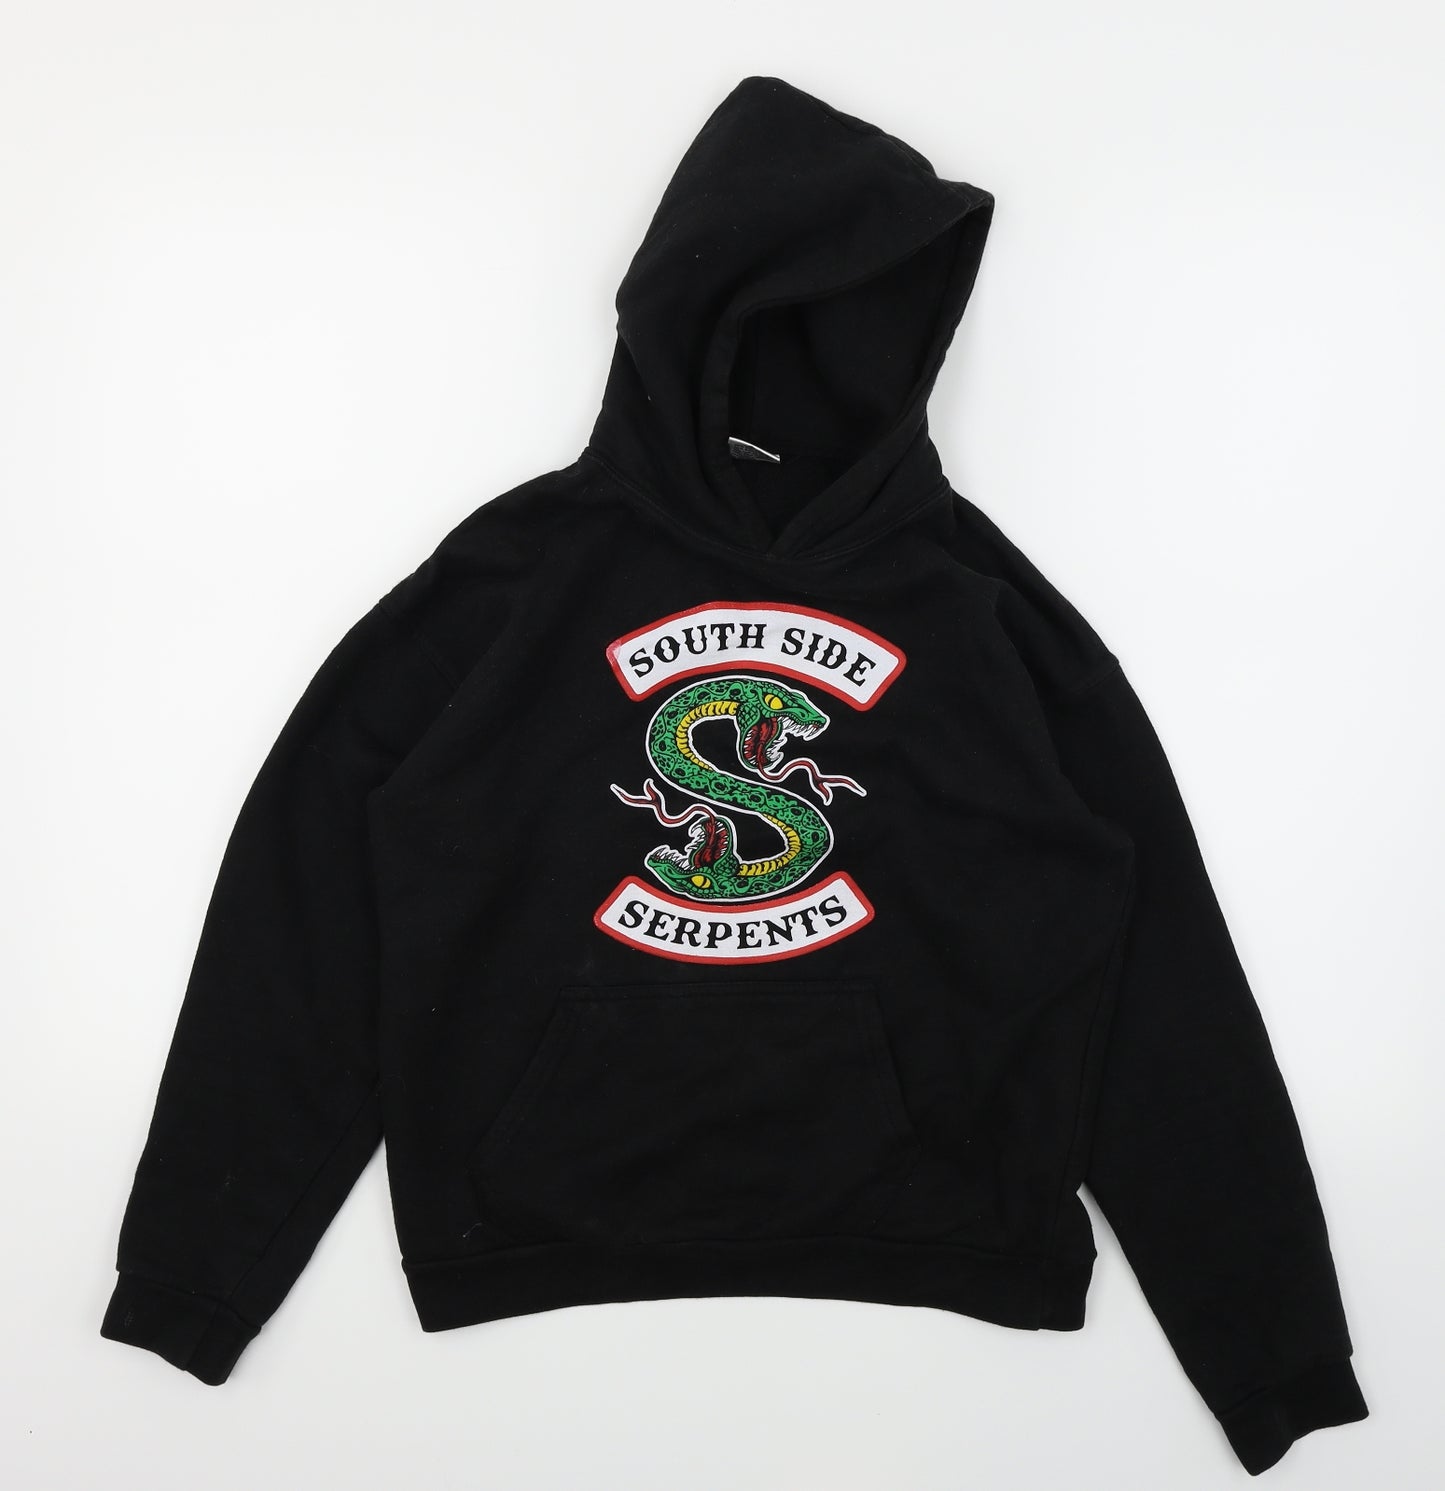 Stars & Stripes Girls Black   Pullover Hoodie Size 12-13 Years  - South Side Serpents